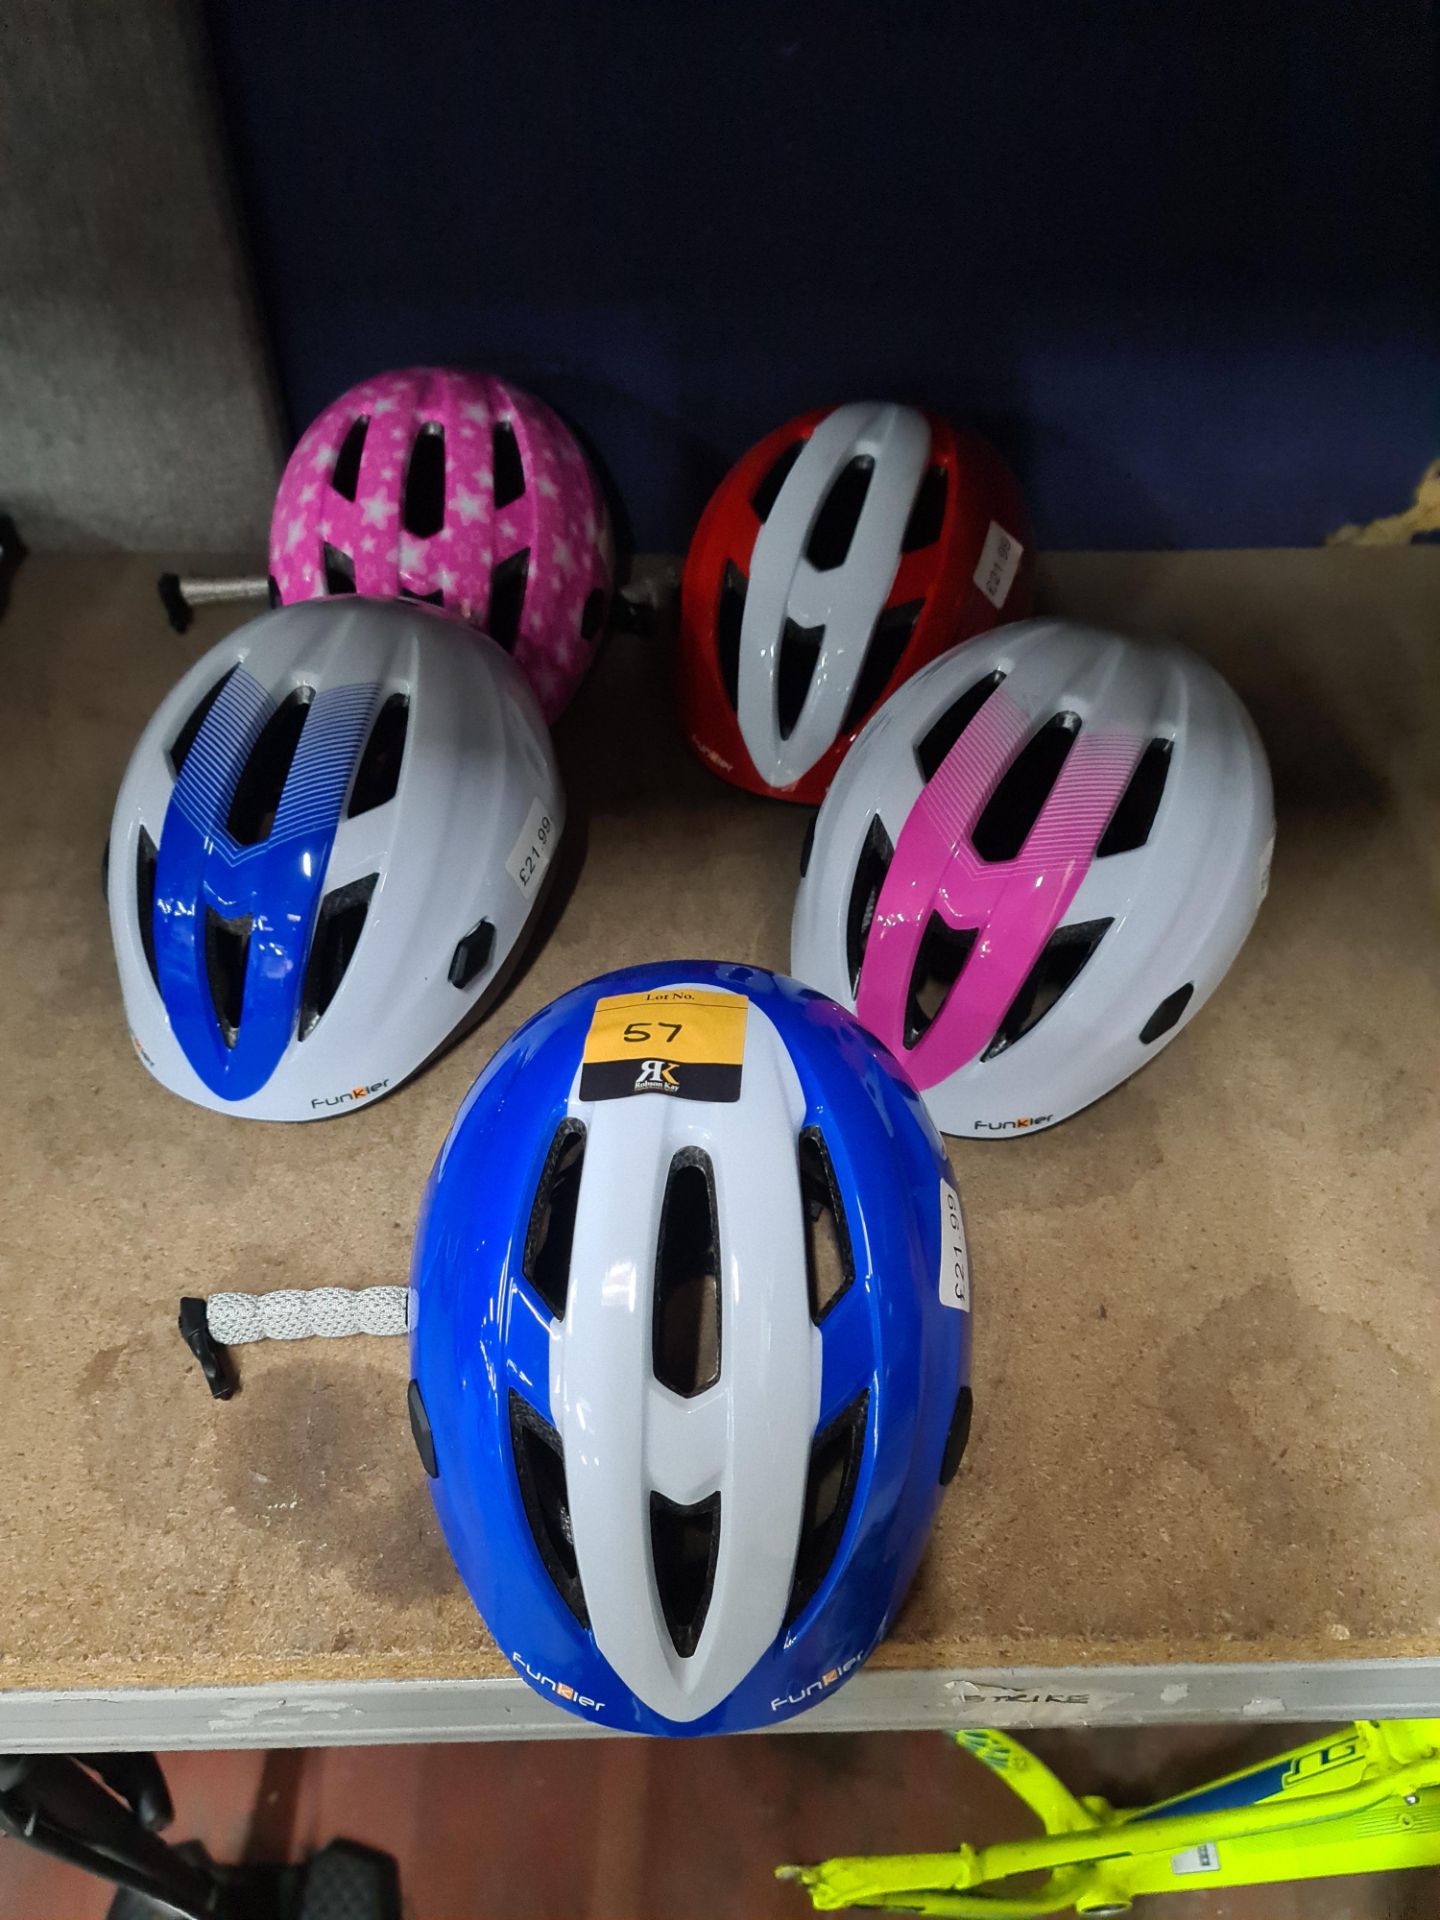 5 off Funkier bicycle helmets - all size XS, all unboxed